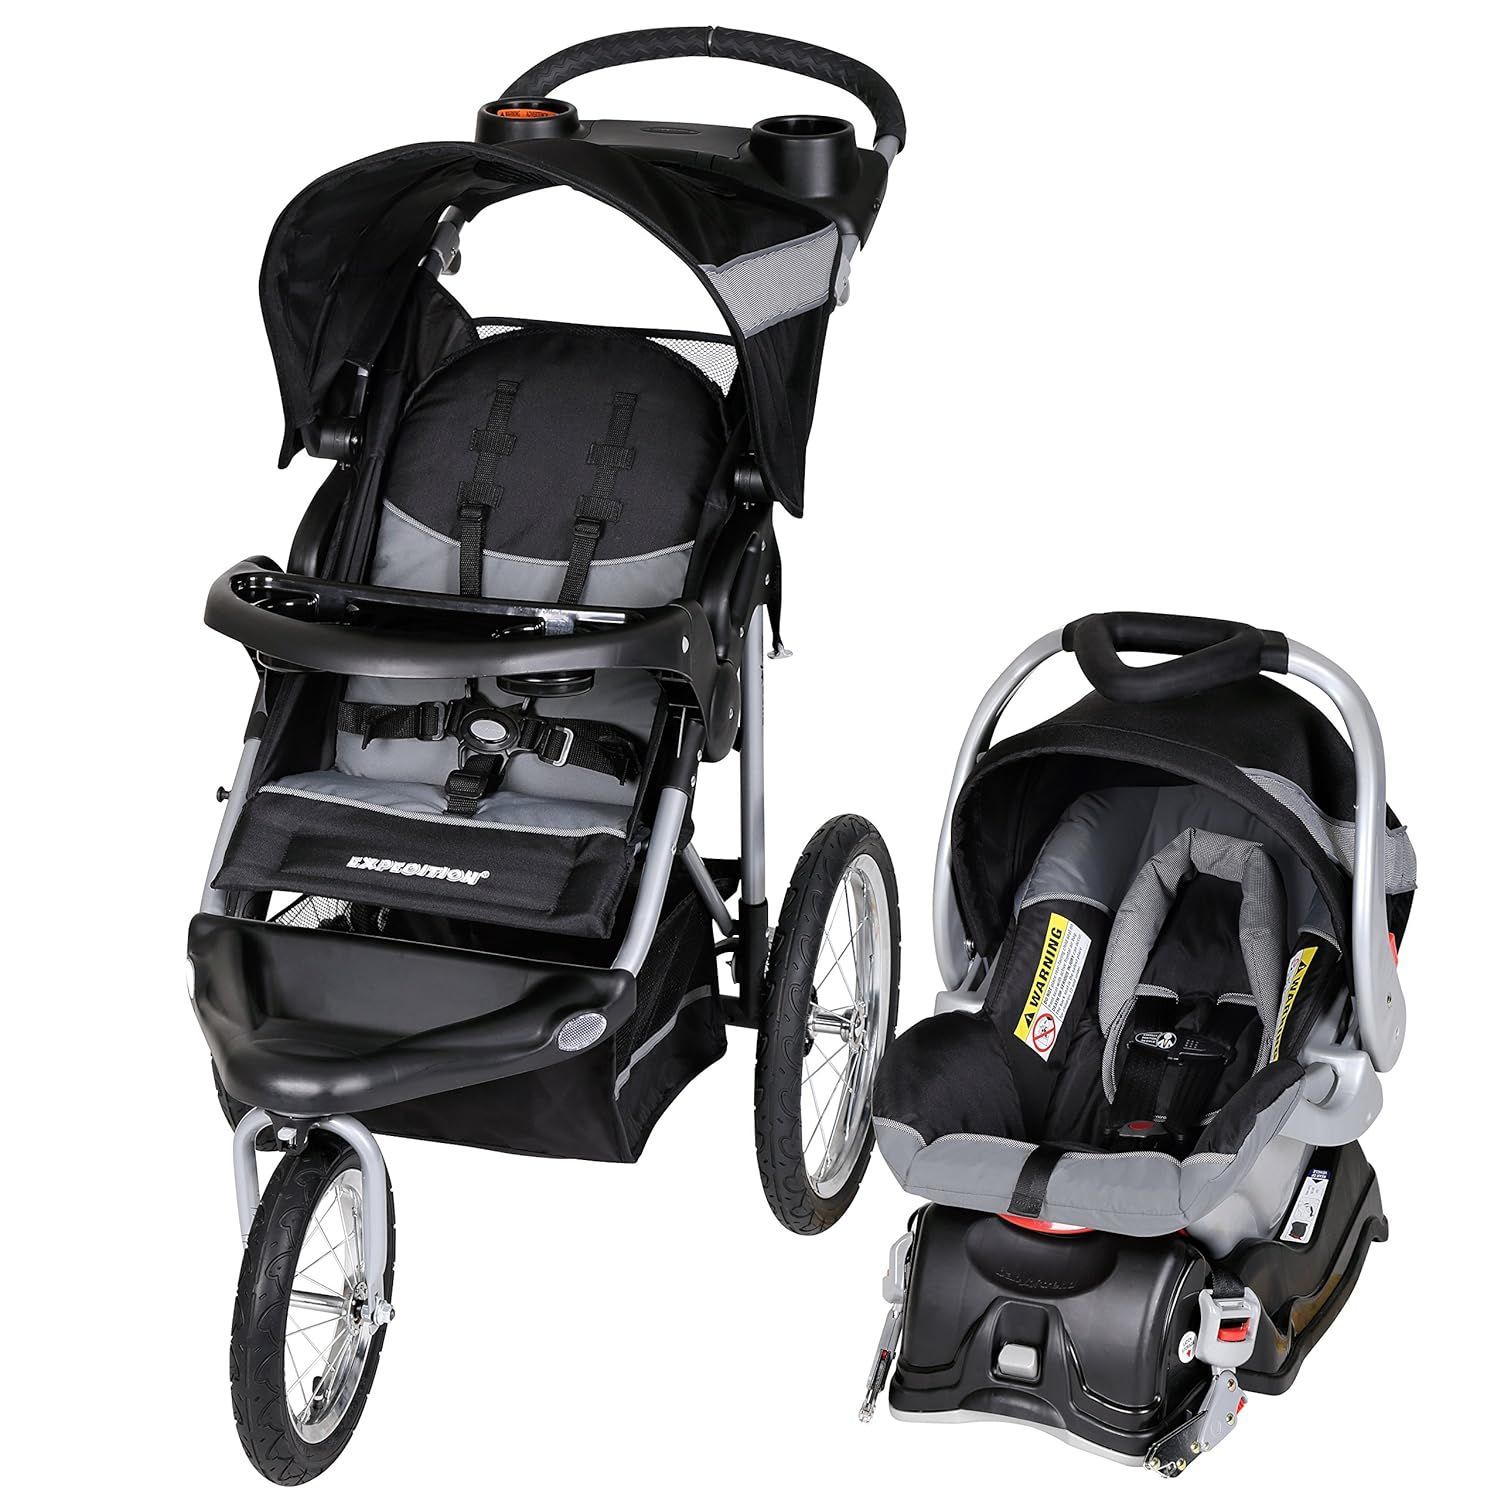 <p><strong>$249.99</strong></p><p><a href="https://www.amazon.com/Baby-Trend-Expedition-Jogger-Millennium/dp/B01BQLPIX0?tag=syndication-20&ascsubtag=%5Bartid%7C10054.g.45246206%5Bsrc%7Cmsn-us">Shop Now</a></p><p>The Baby Trend stuffs a lot to like into a package that costs a very reasonable at $180. This refreshingly inexpensive stroller has a lockable front swivel wheel, a “parent tray” with cupholders, a foam-padded handlebar, and offers good visibility into the child’s seat while running. It also is capable of going off road thanks to beefy tires that can handle plenty of bumps (a five-point safety harness keeps Junior securely locked in place). The only real drawback here is the weight, which at 41 pounds, makes pushing this stroller technically count as sled work.</p>